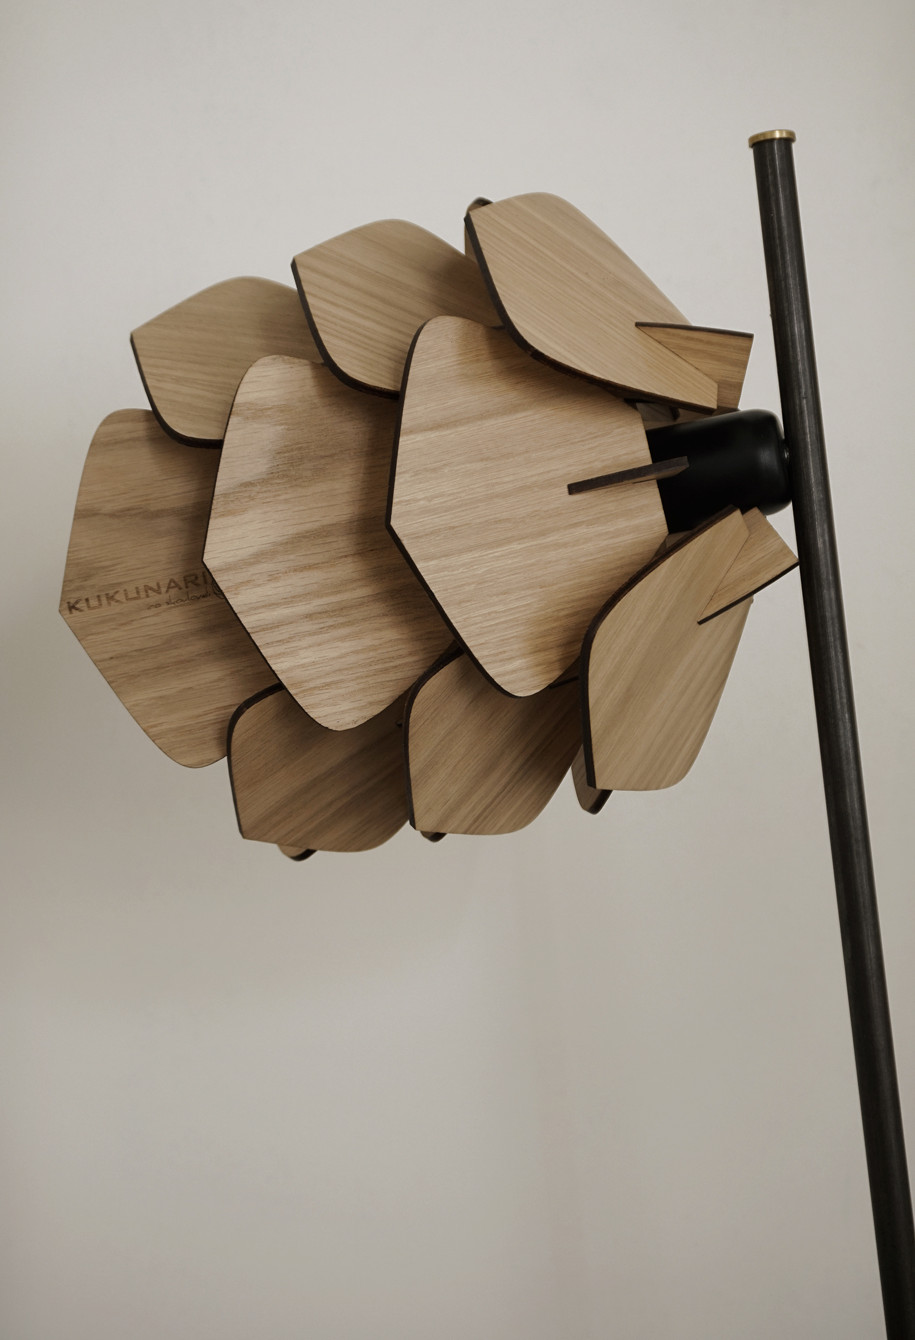 Archisearch KUKUNARI one line: the new collection of parametric wooden lamps by Greek architect Iro Skouloudi